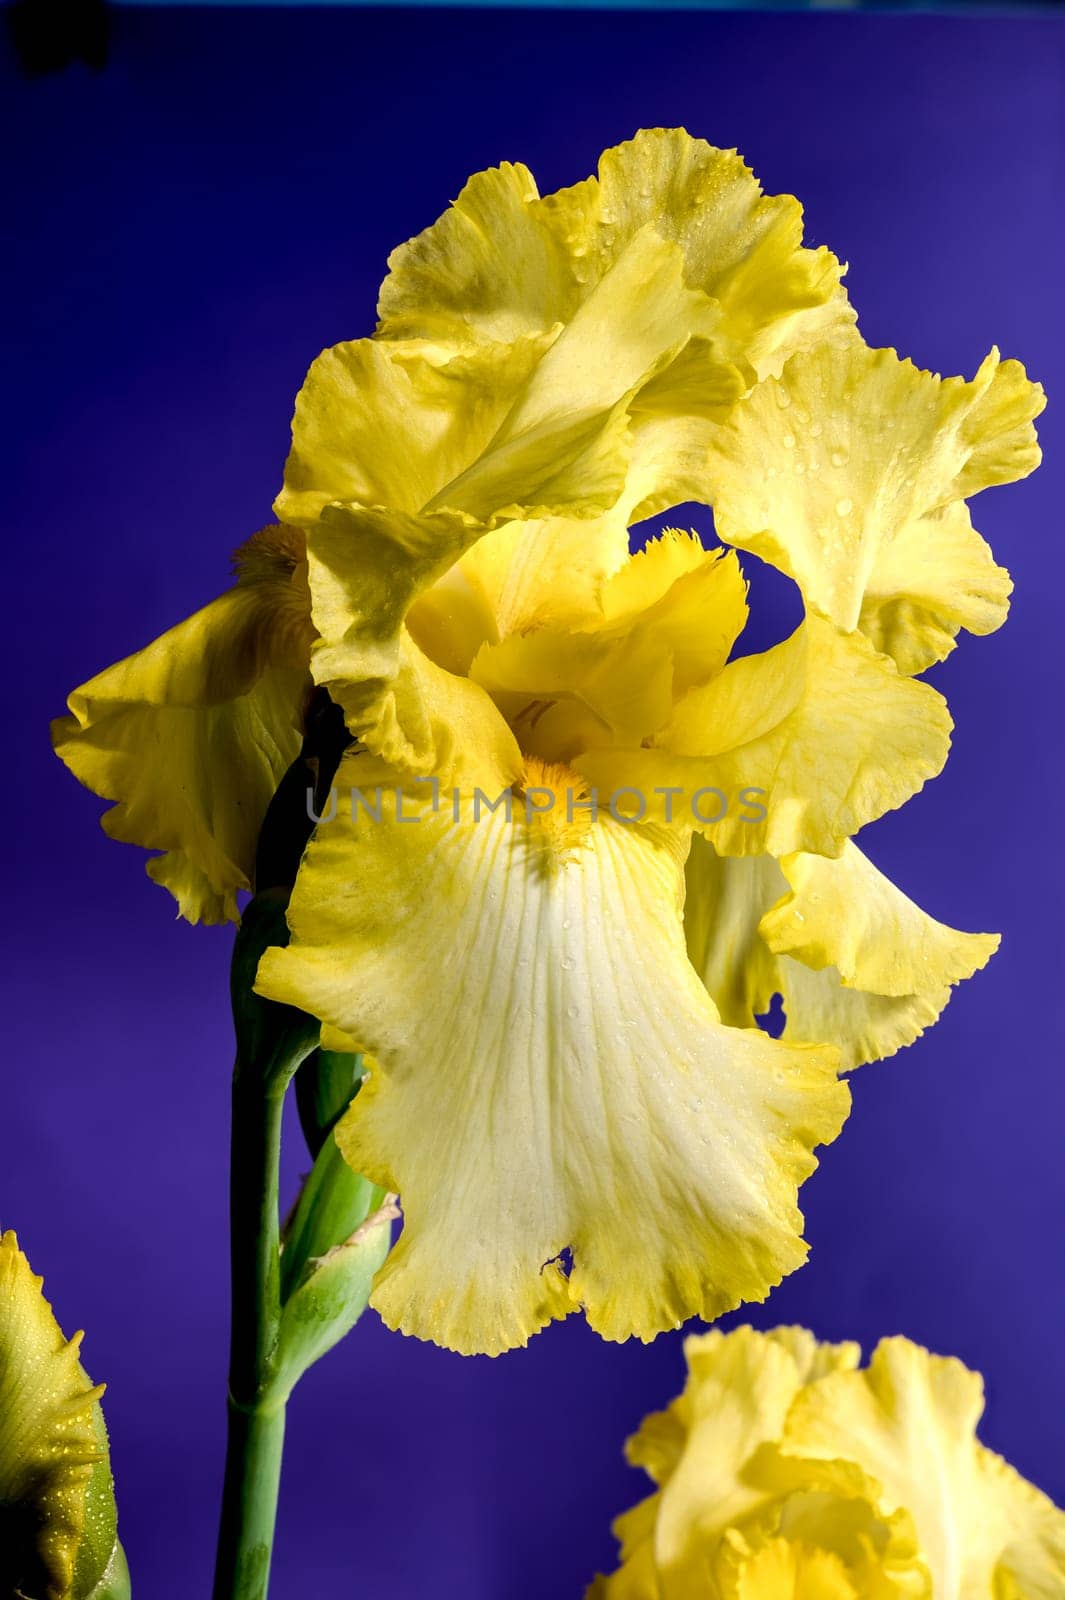 Blooming yellow iris on a purple background by Multipedia